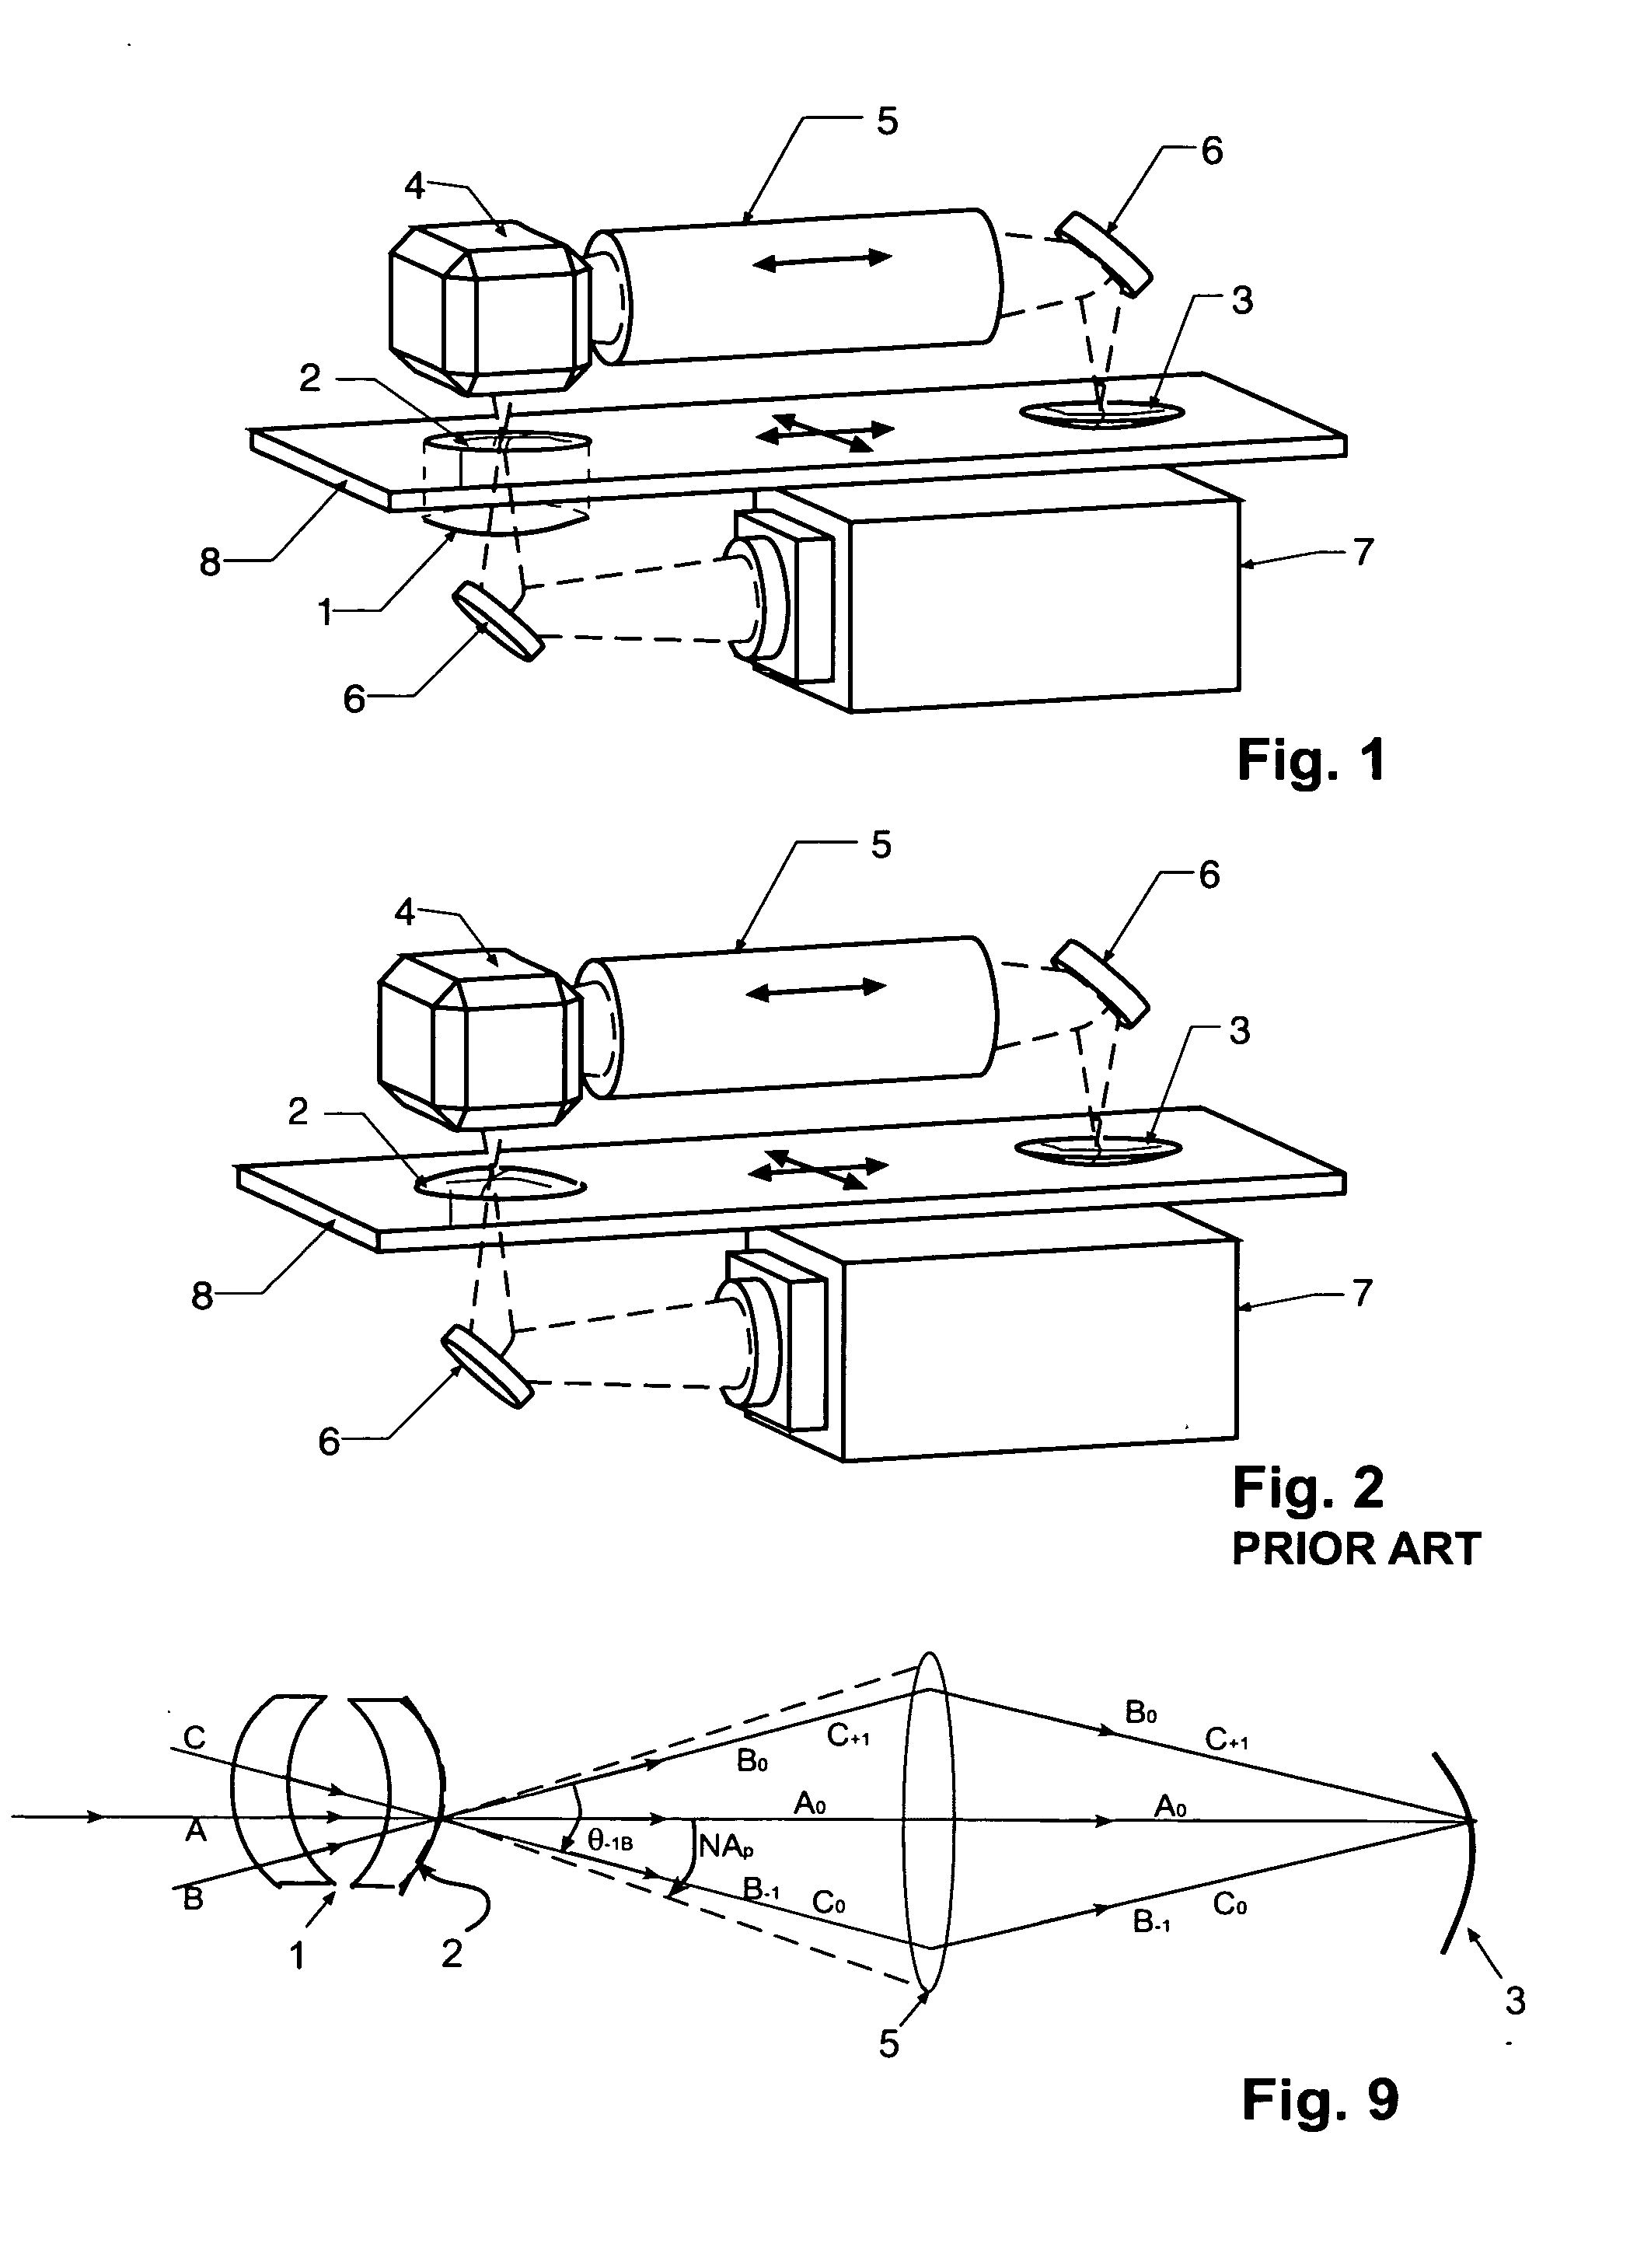 Illumination compensator for curved surface lithography